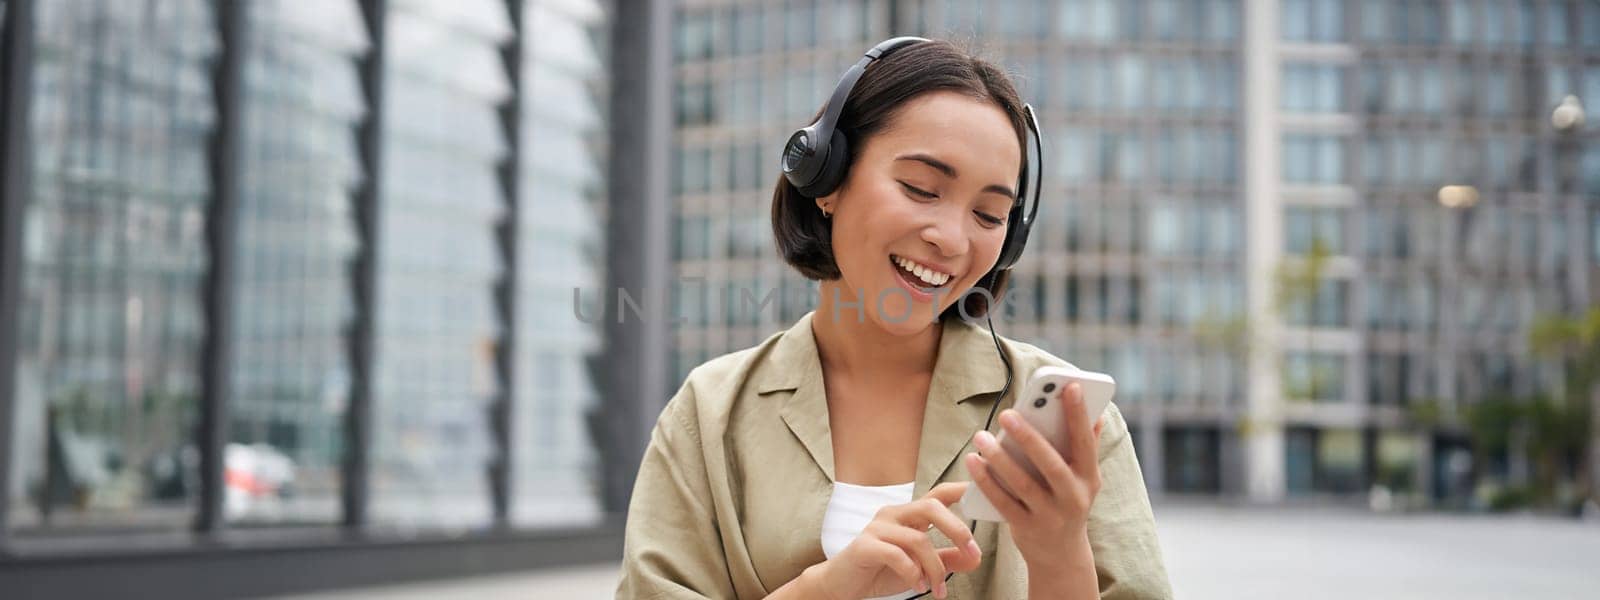 Happy girl dances on street and listens music in wireless headphones, holds mobile phone, using streaming app.